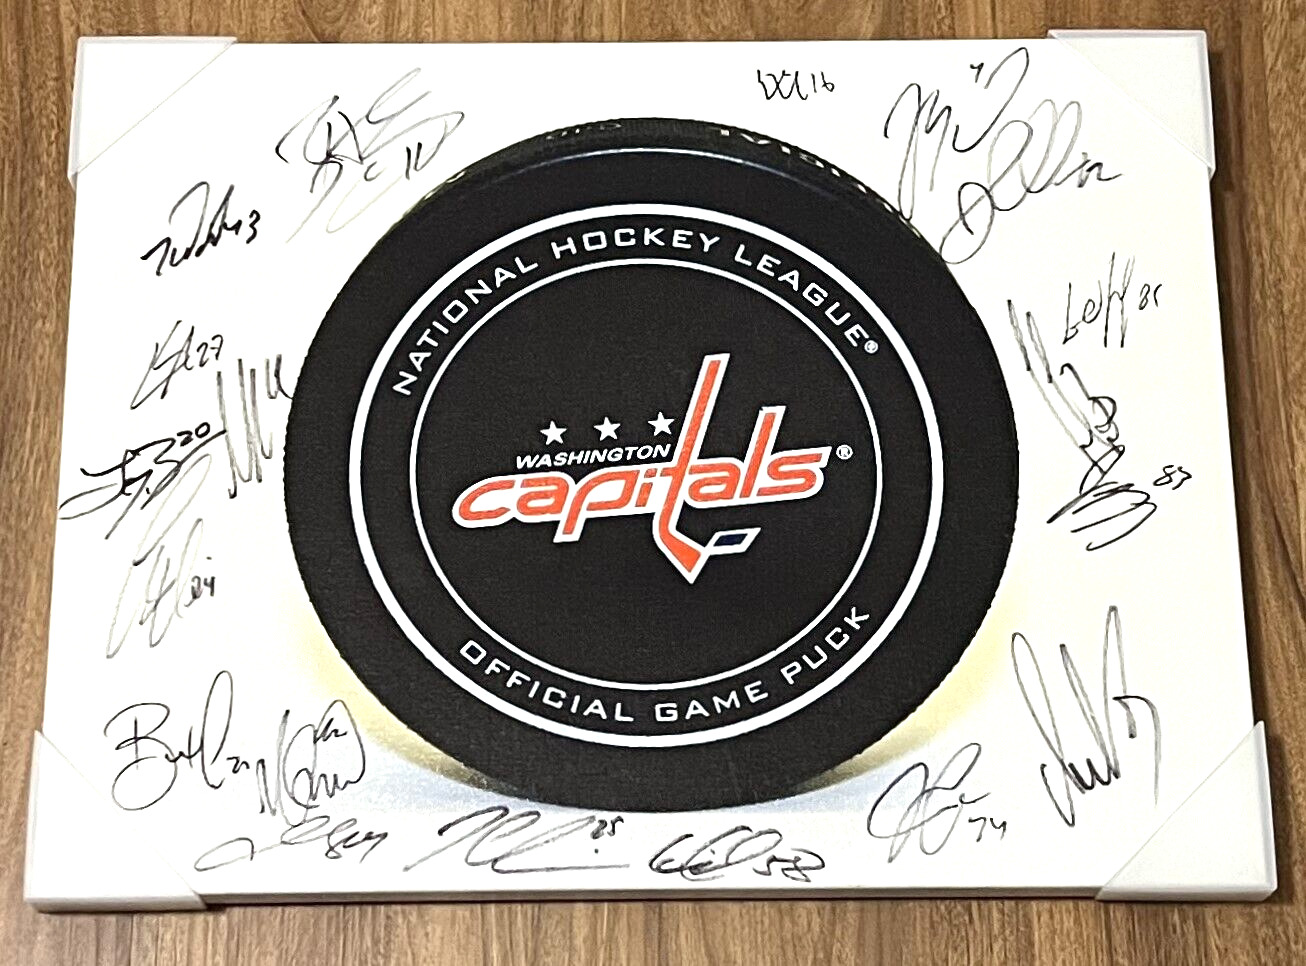 WASHINGTON CAPITALS 2013-14 Team Signed Autographed Wall Hanging Canvas Puck NHL